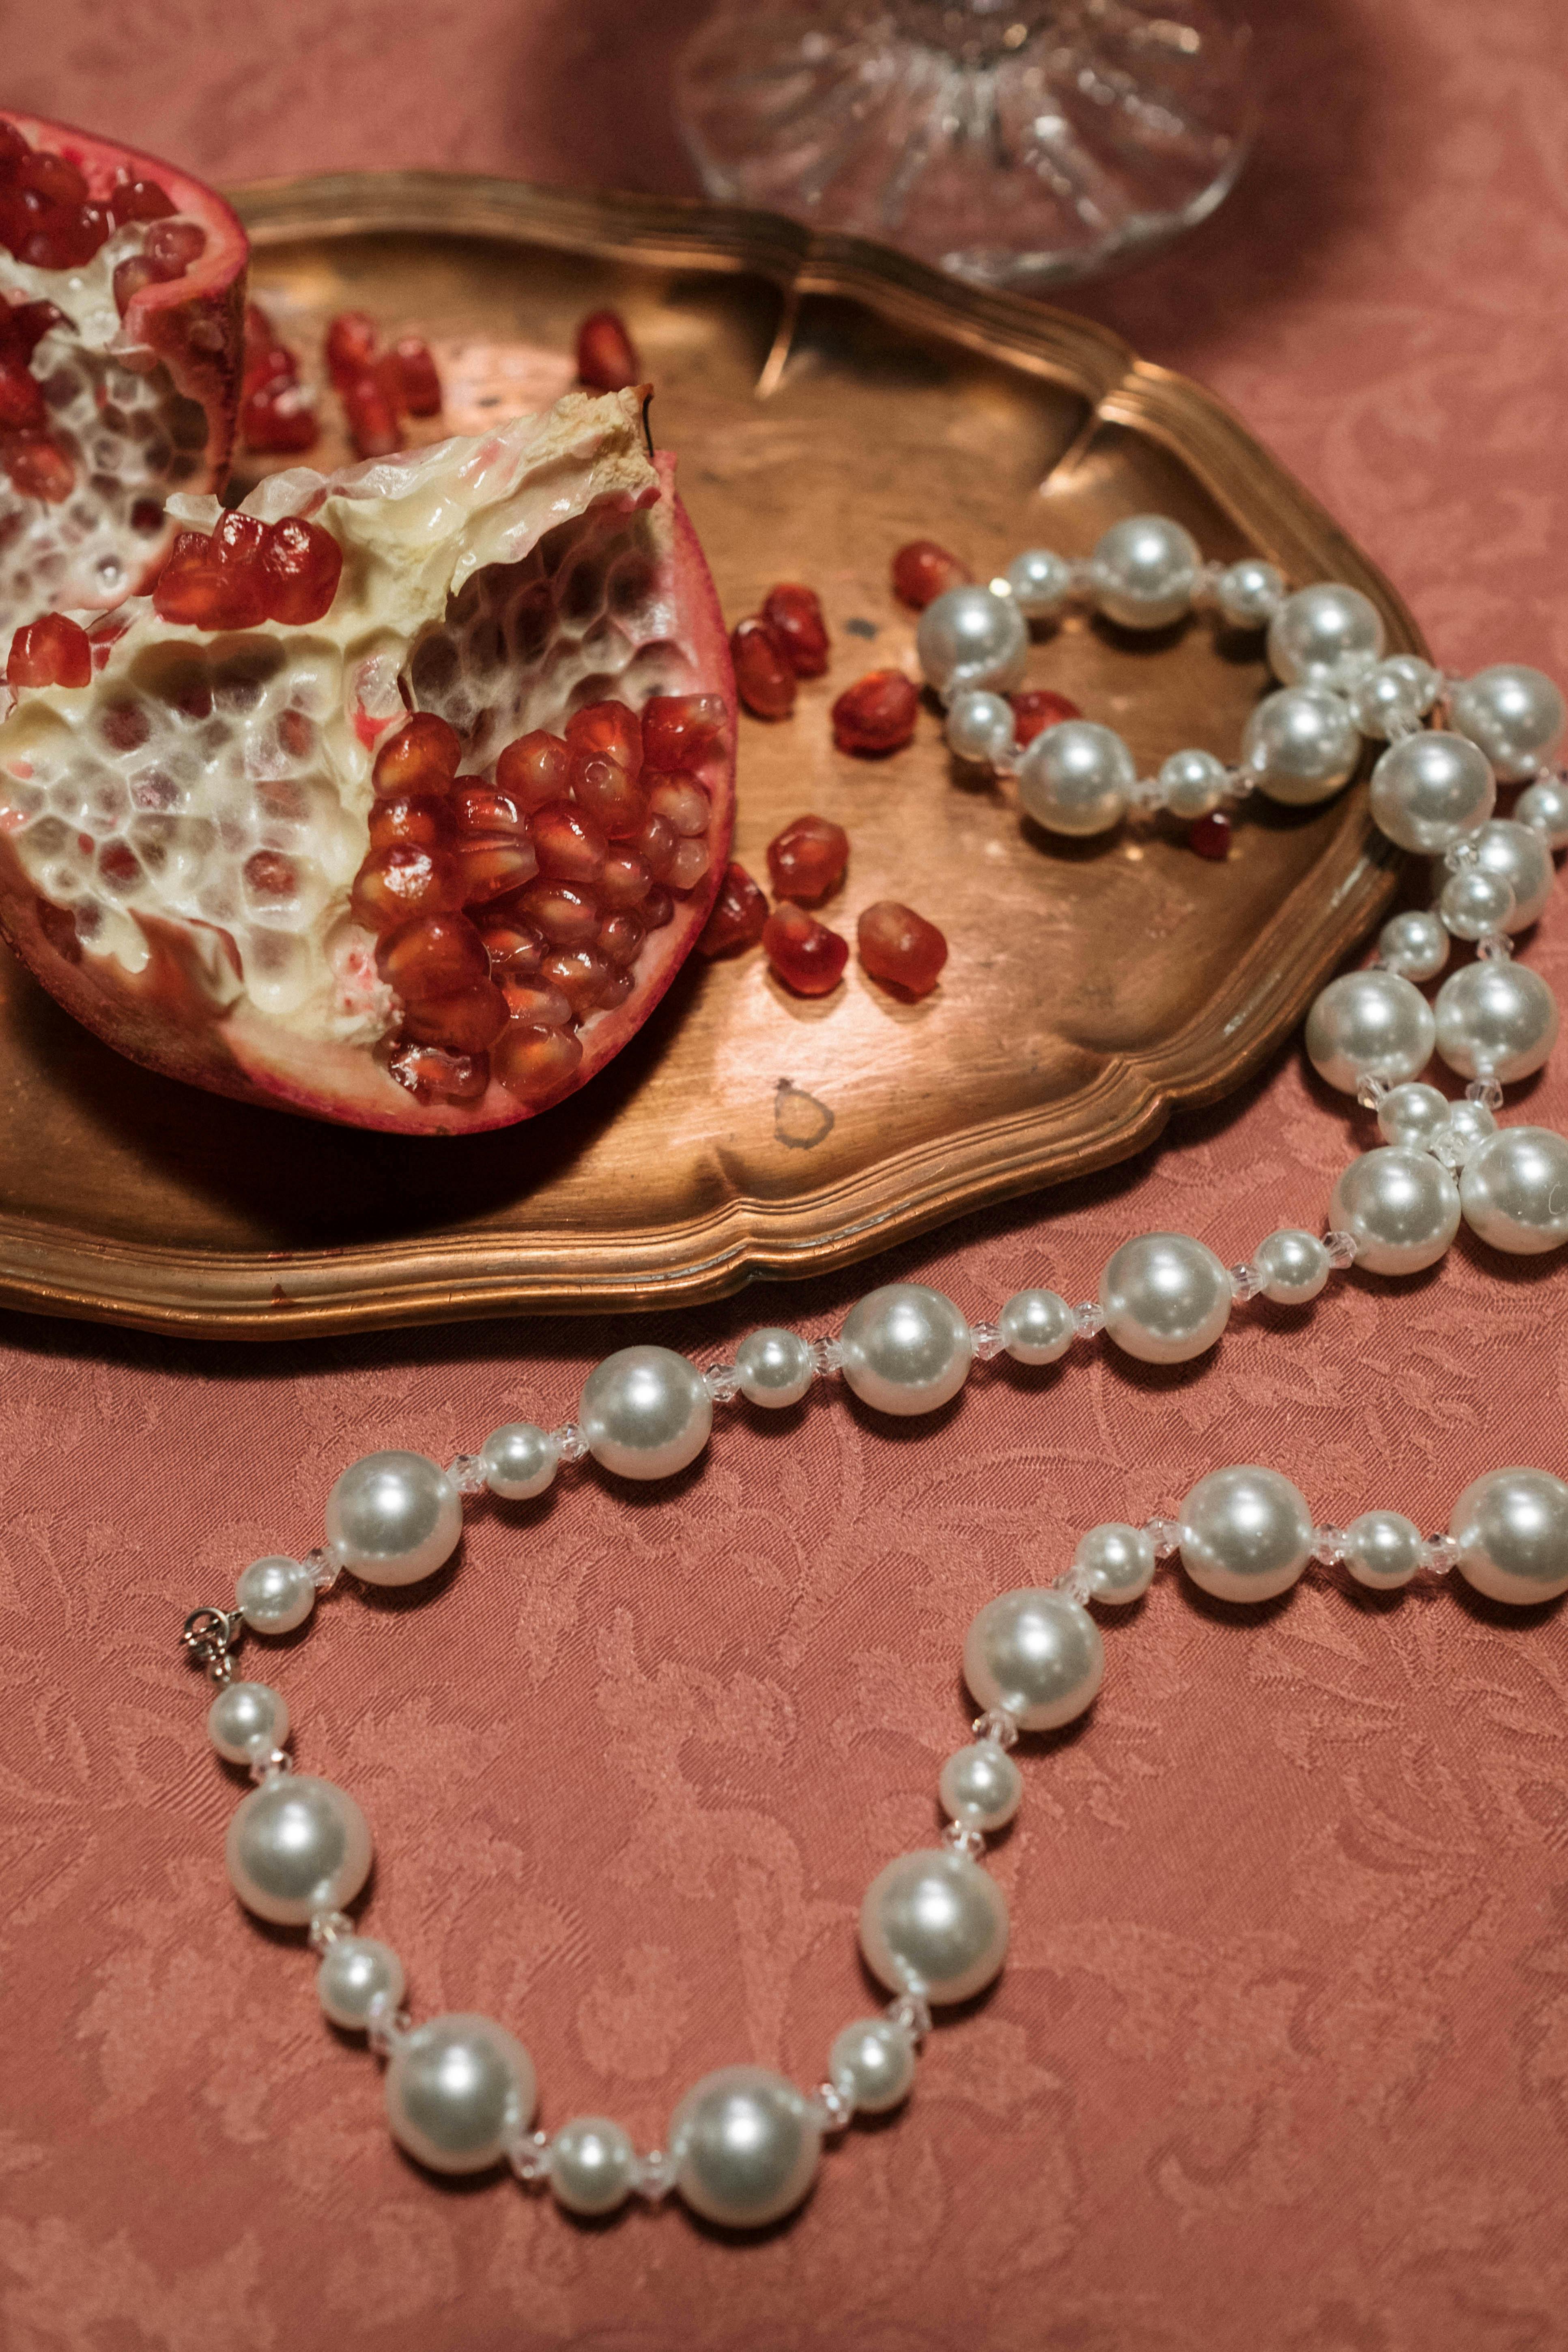 White pearls necklace on grunge wooden table — Stock Photo © tomert  #108109778